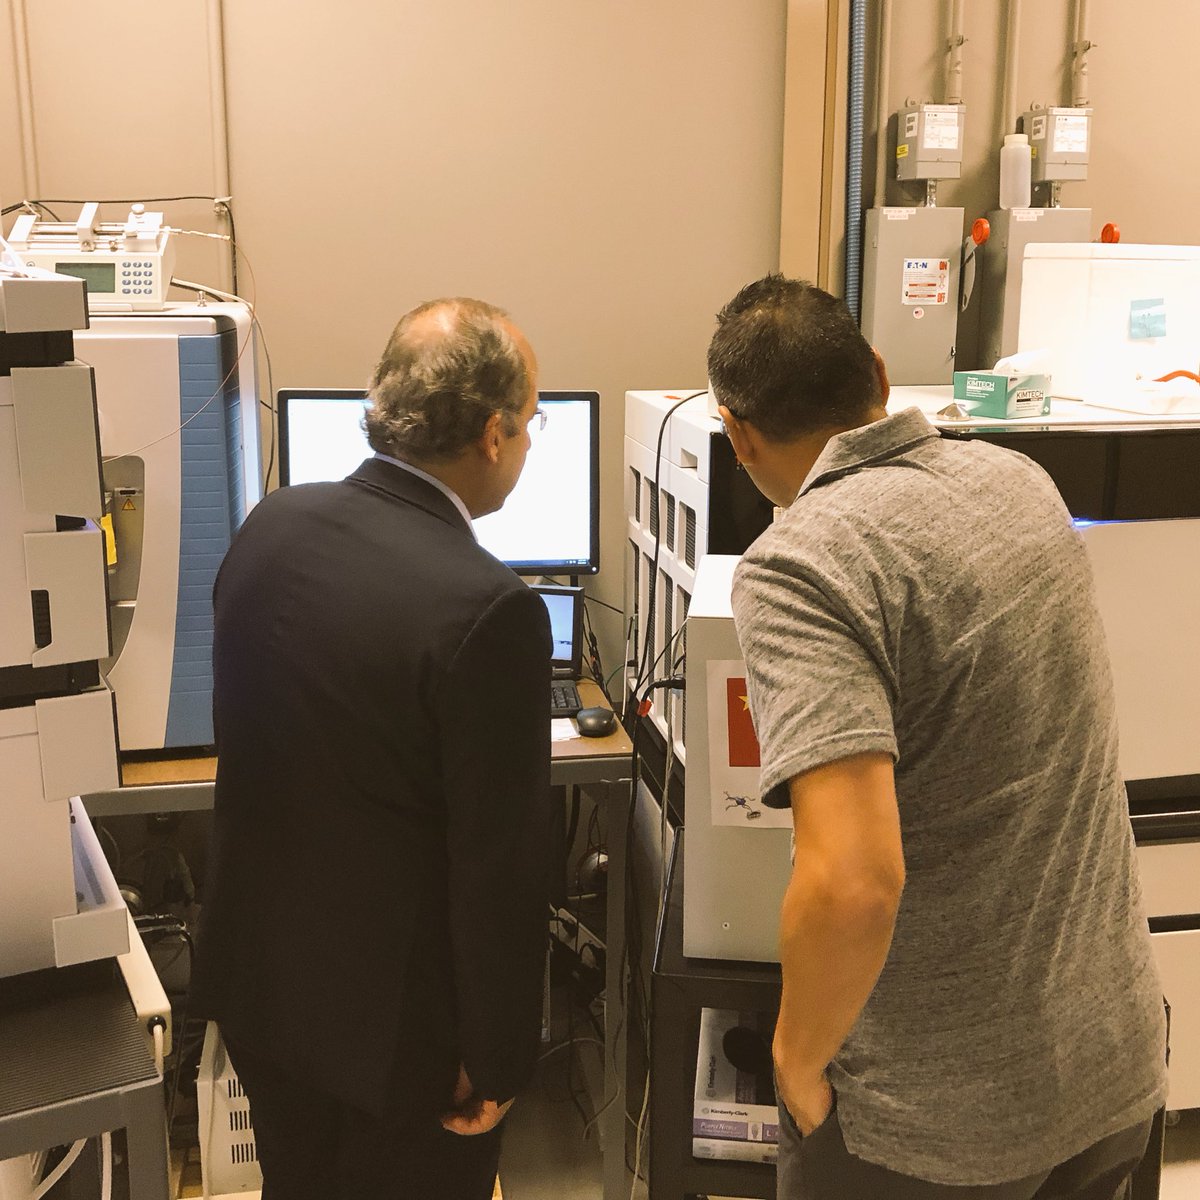 Former president of Mexico, Felipe Calderon, visited our lab today to learn about epigenetics and our current research